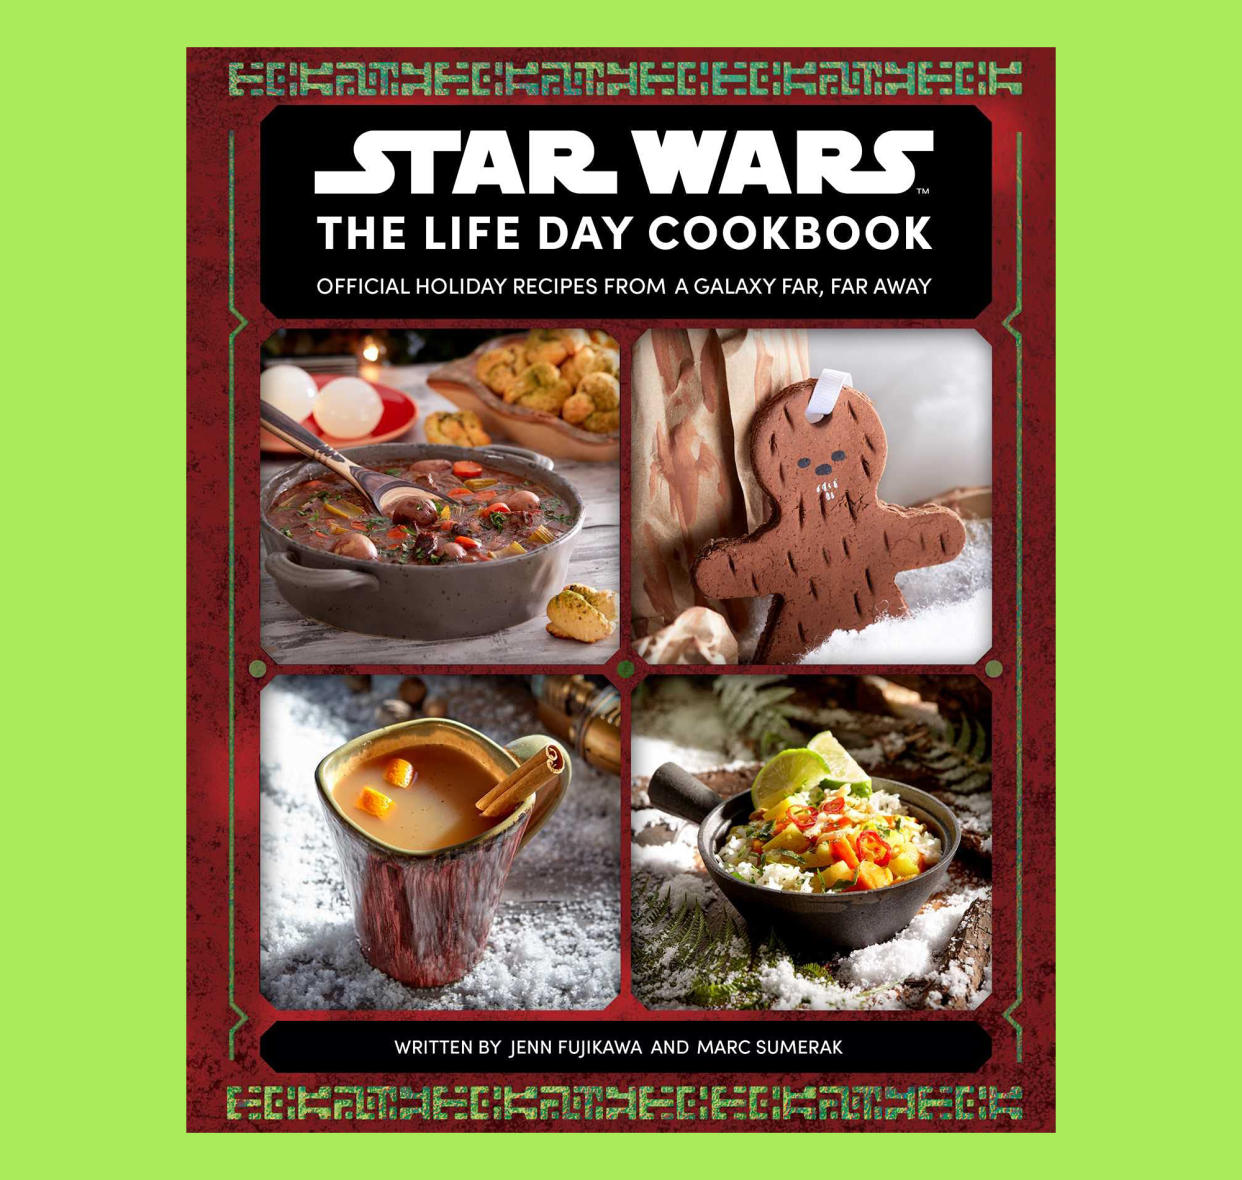 Star Wars: The Life Day Cookbook (new for 2021)